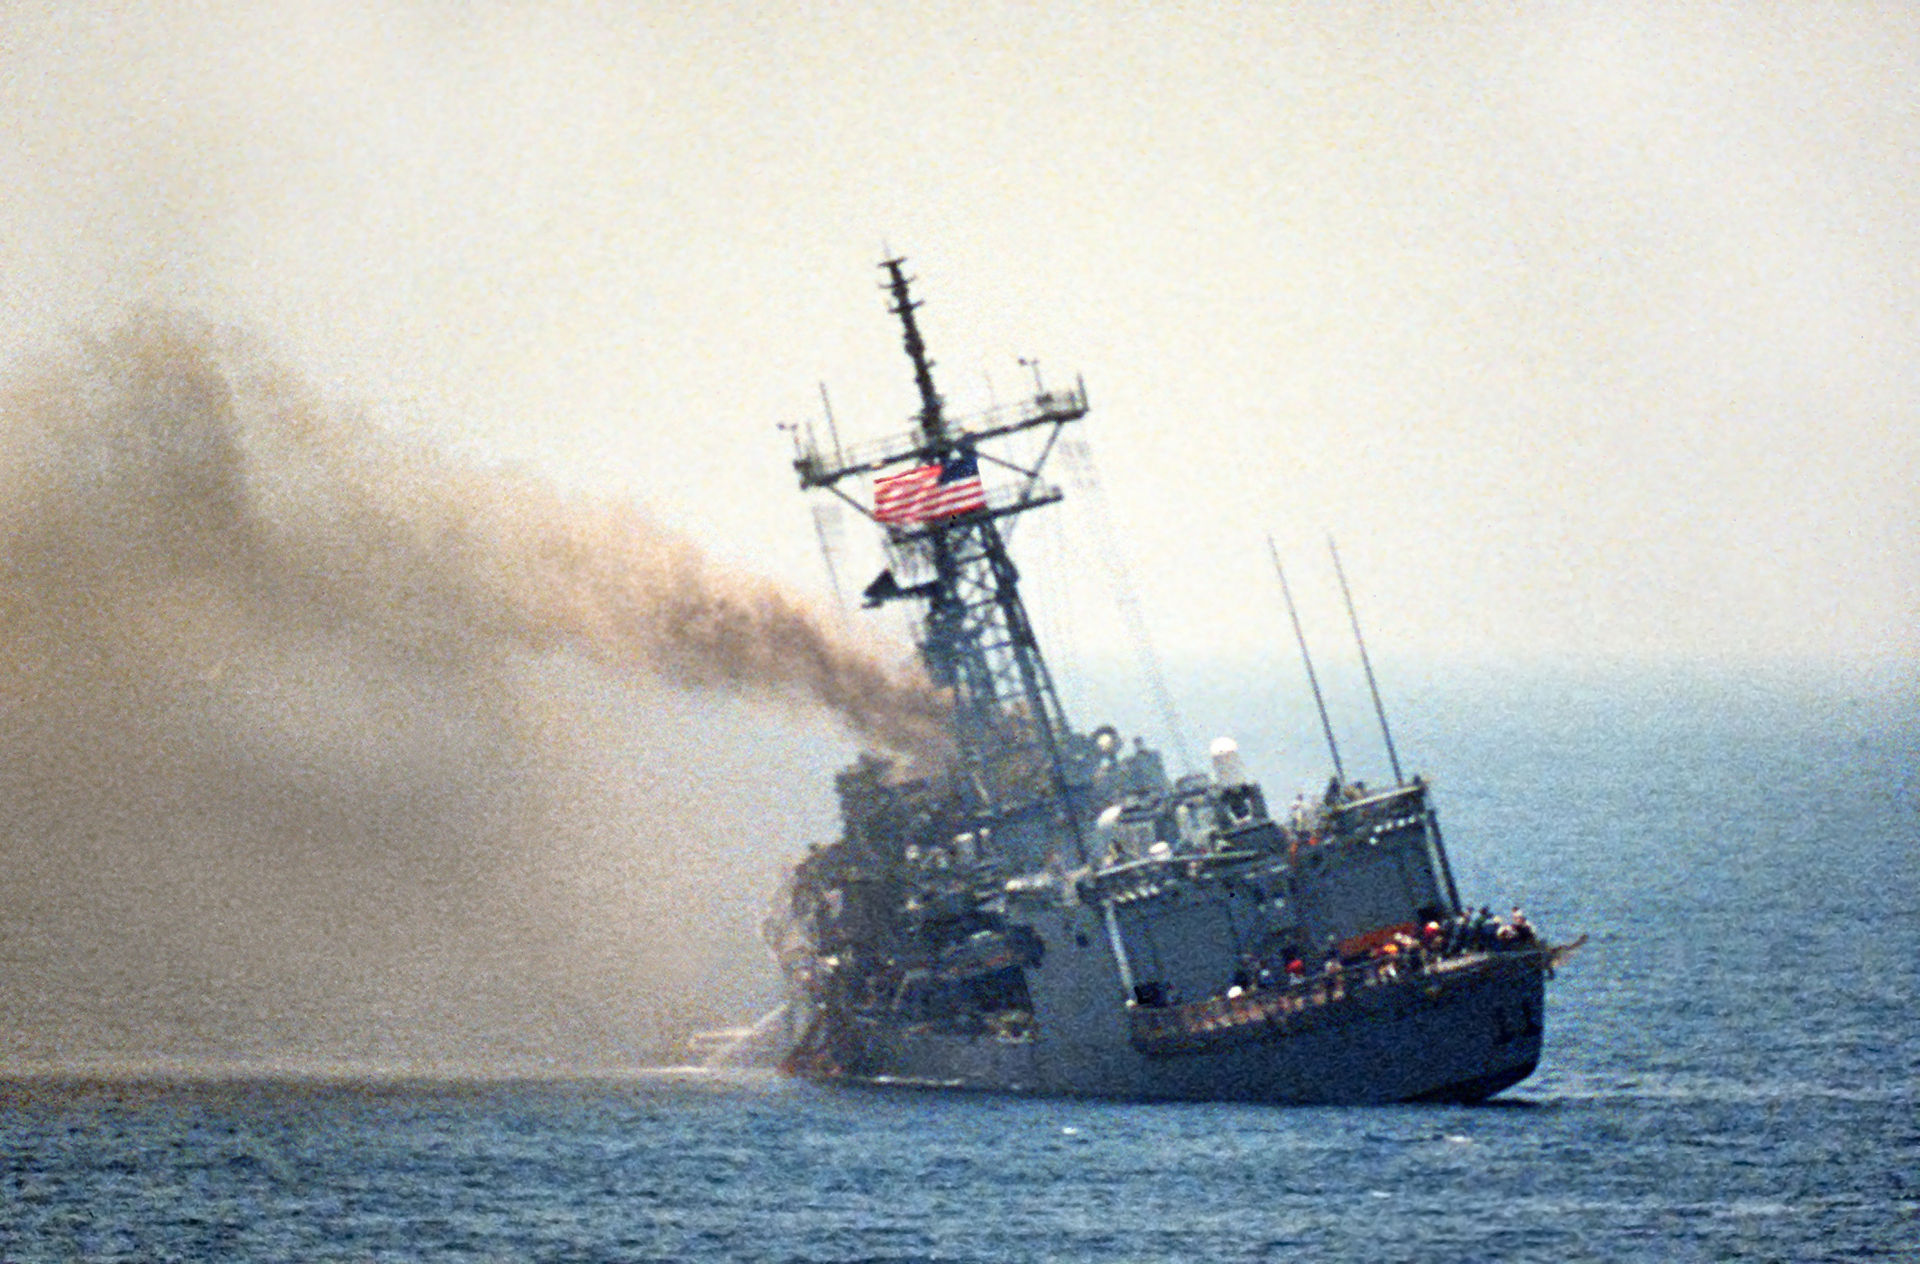 USS Stark lists to port after being struck by an Iraqi-launched Exocet missile in the Arabian Gulf, 17 May 1987. Department of Defense. Public Domain.